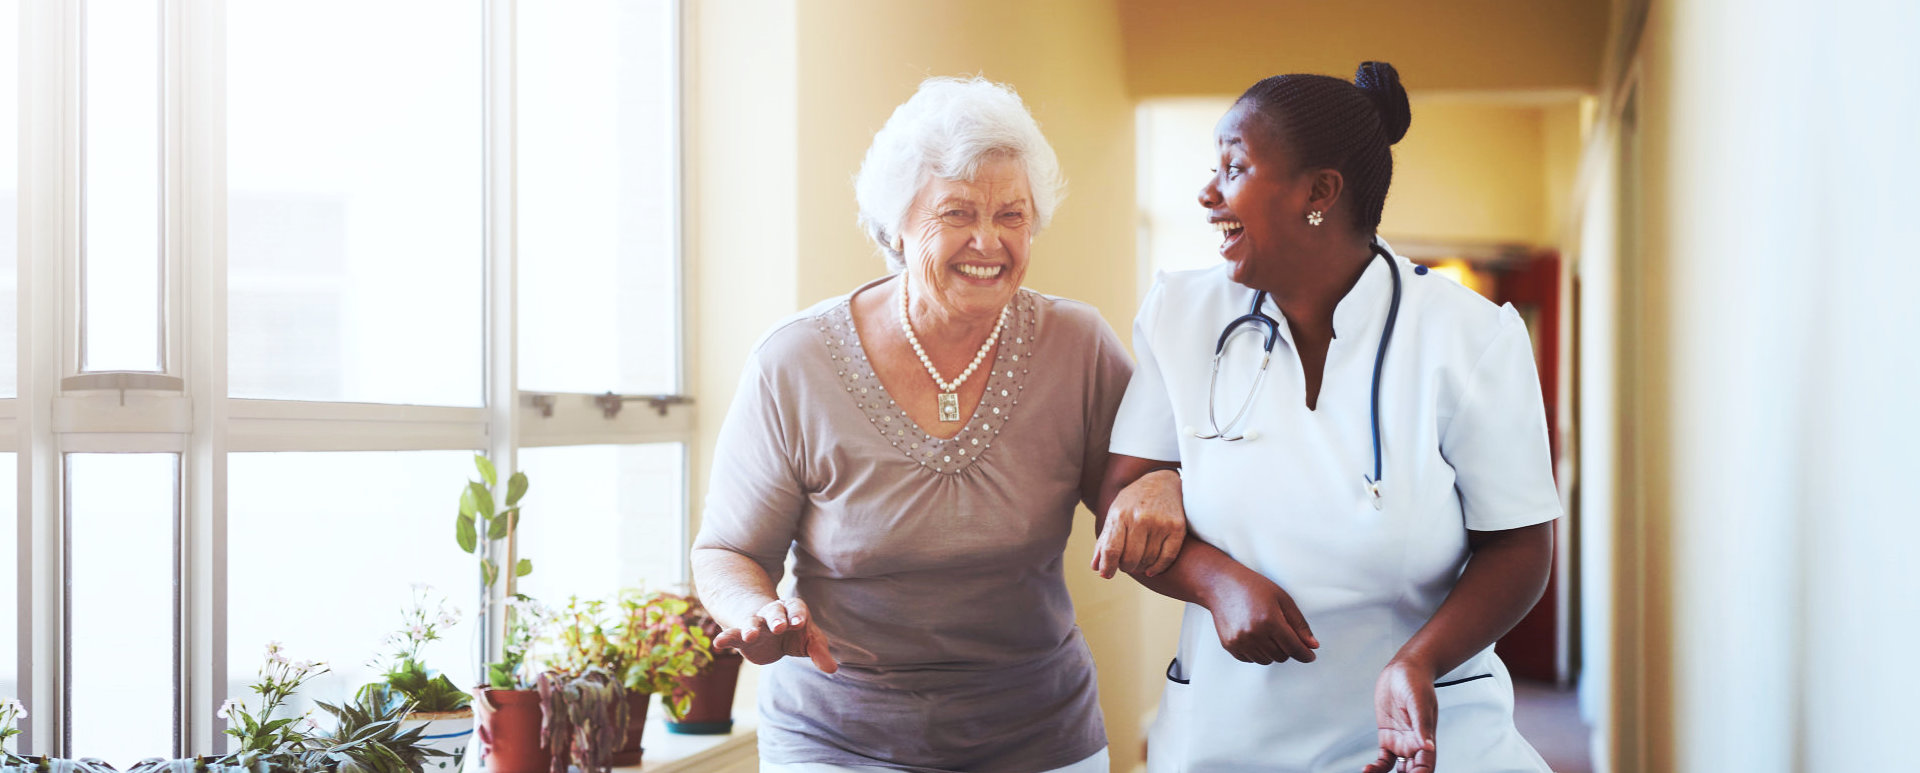 caregiver laughing with the patient